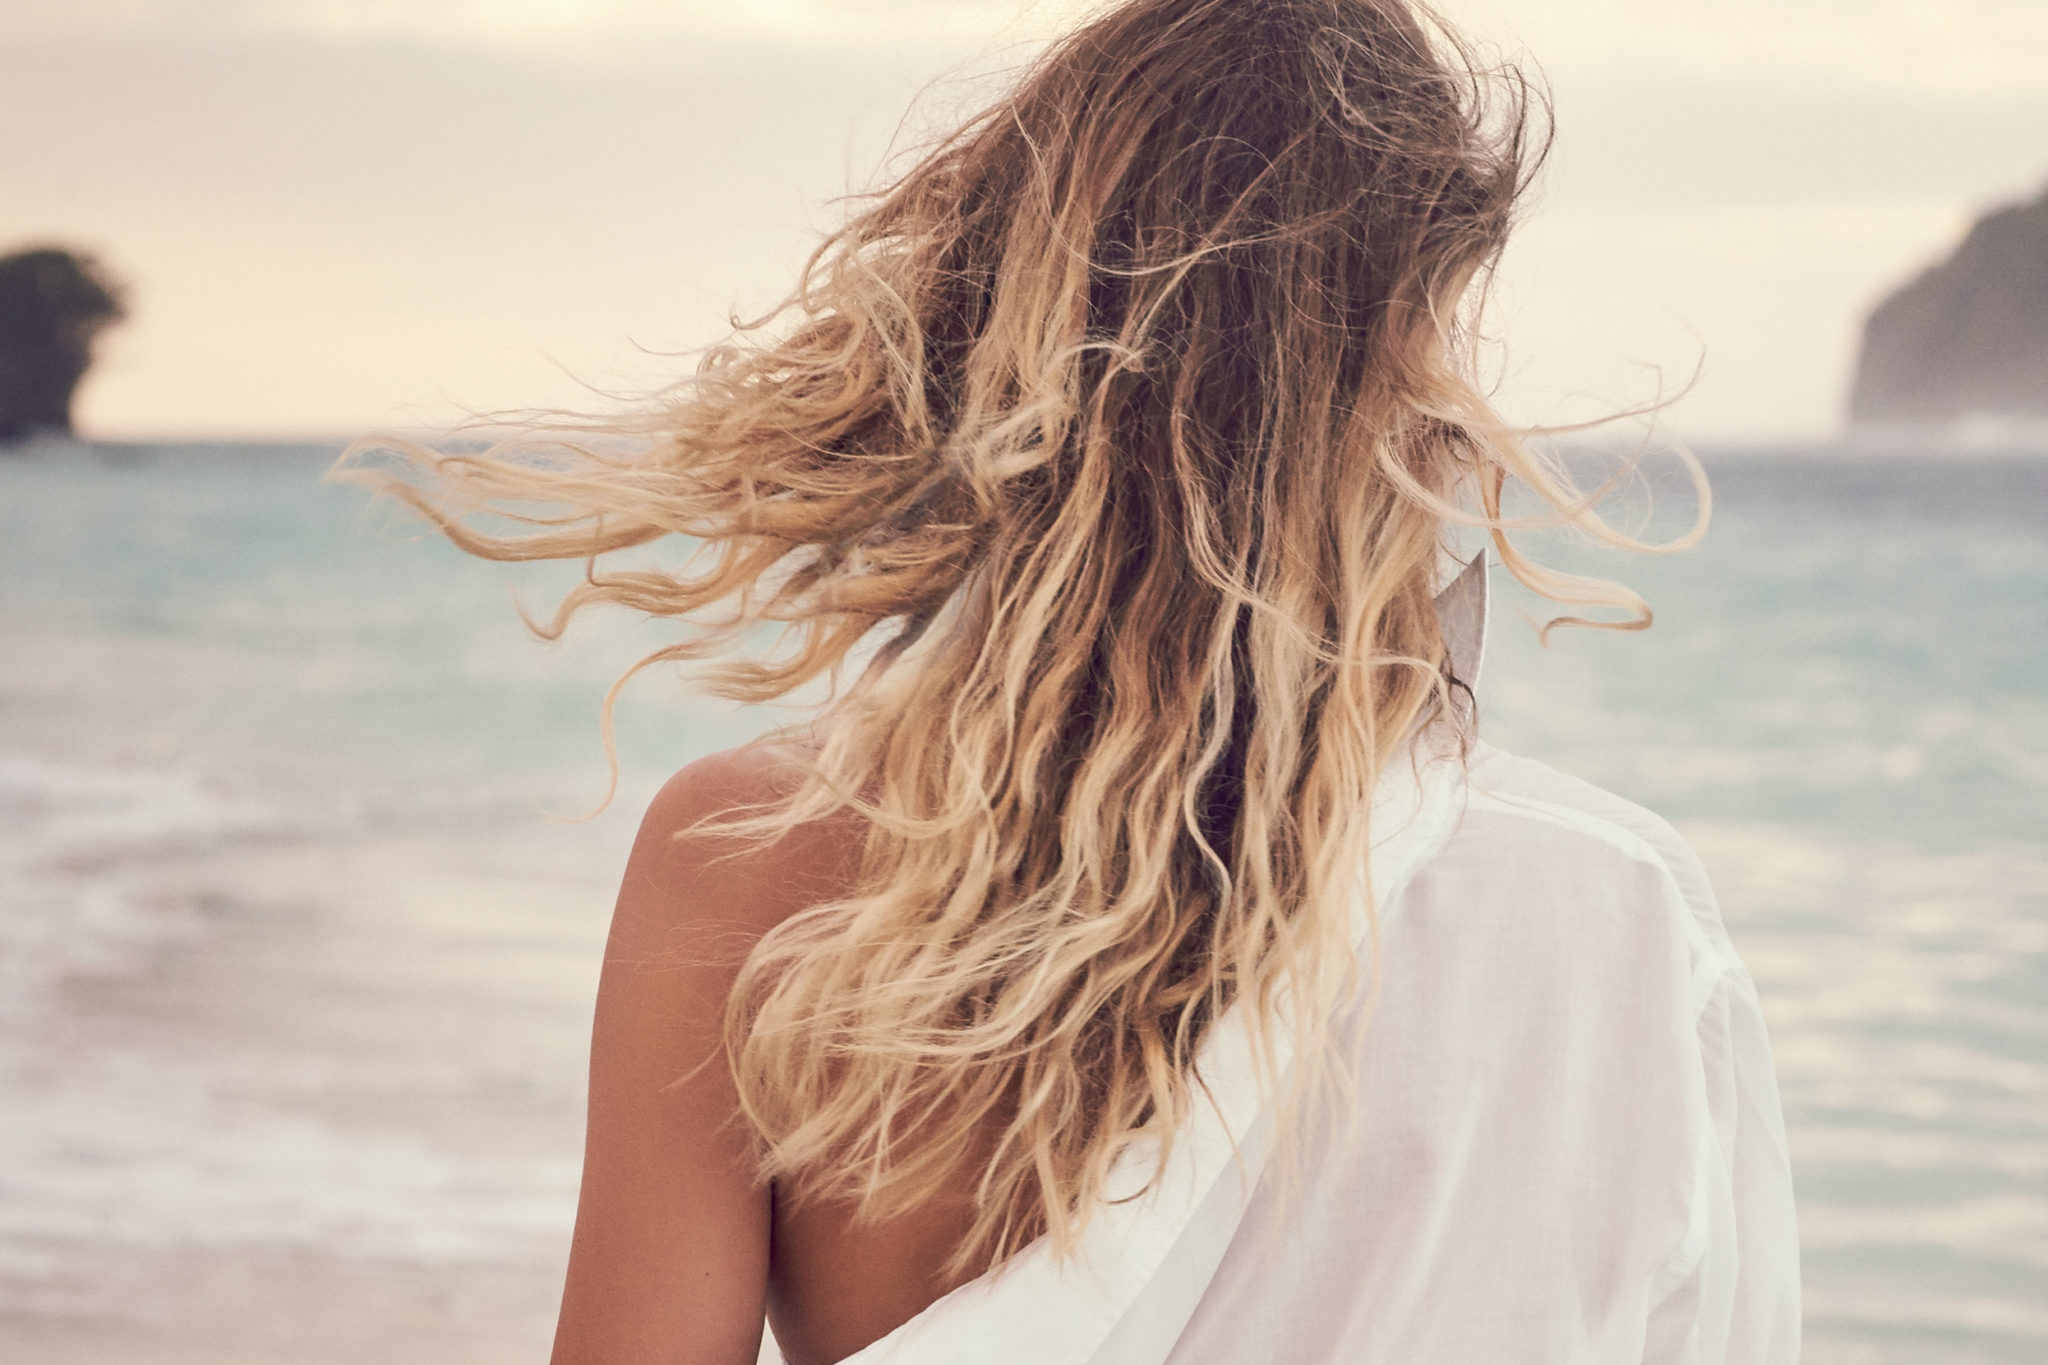 How to Keep Your Hair Radiant & Healthy Over Summer